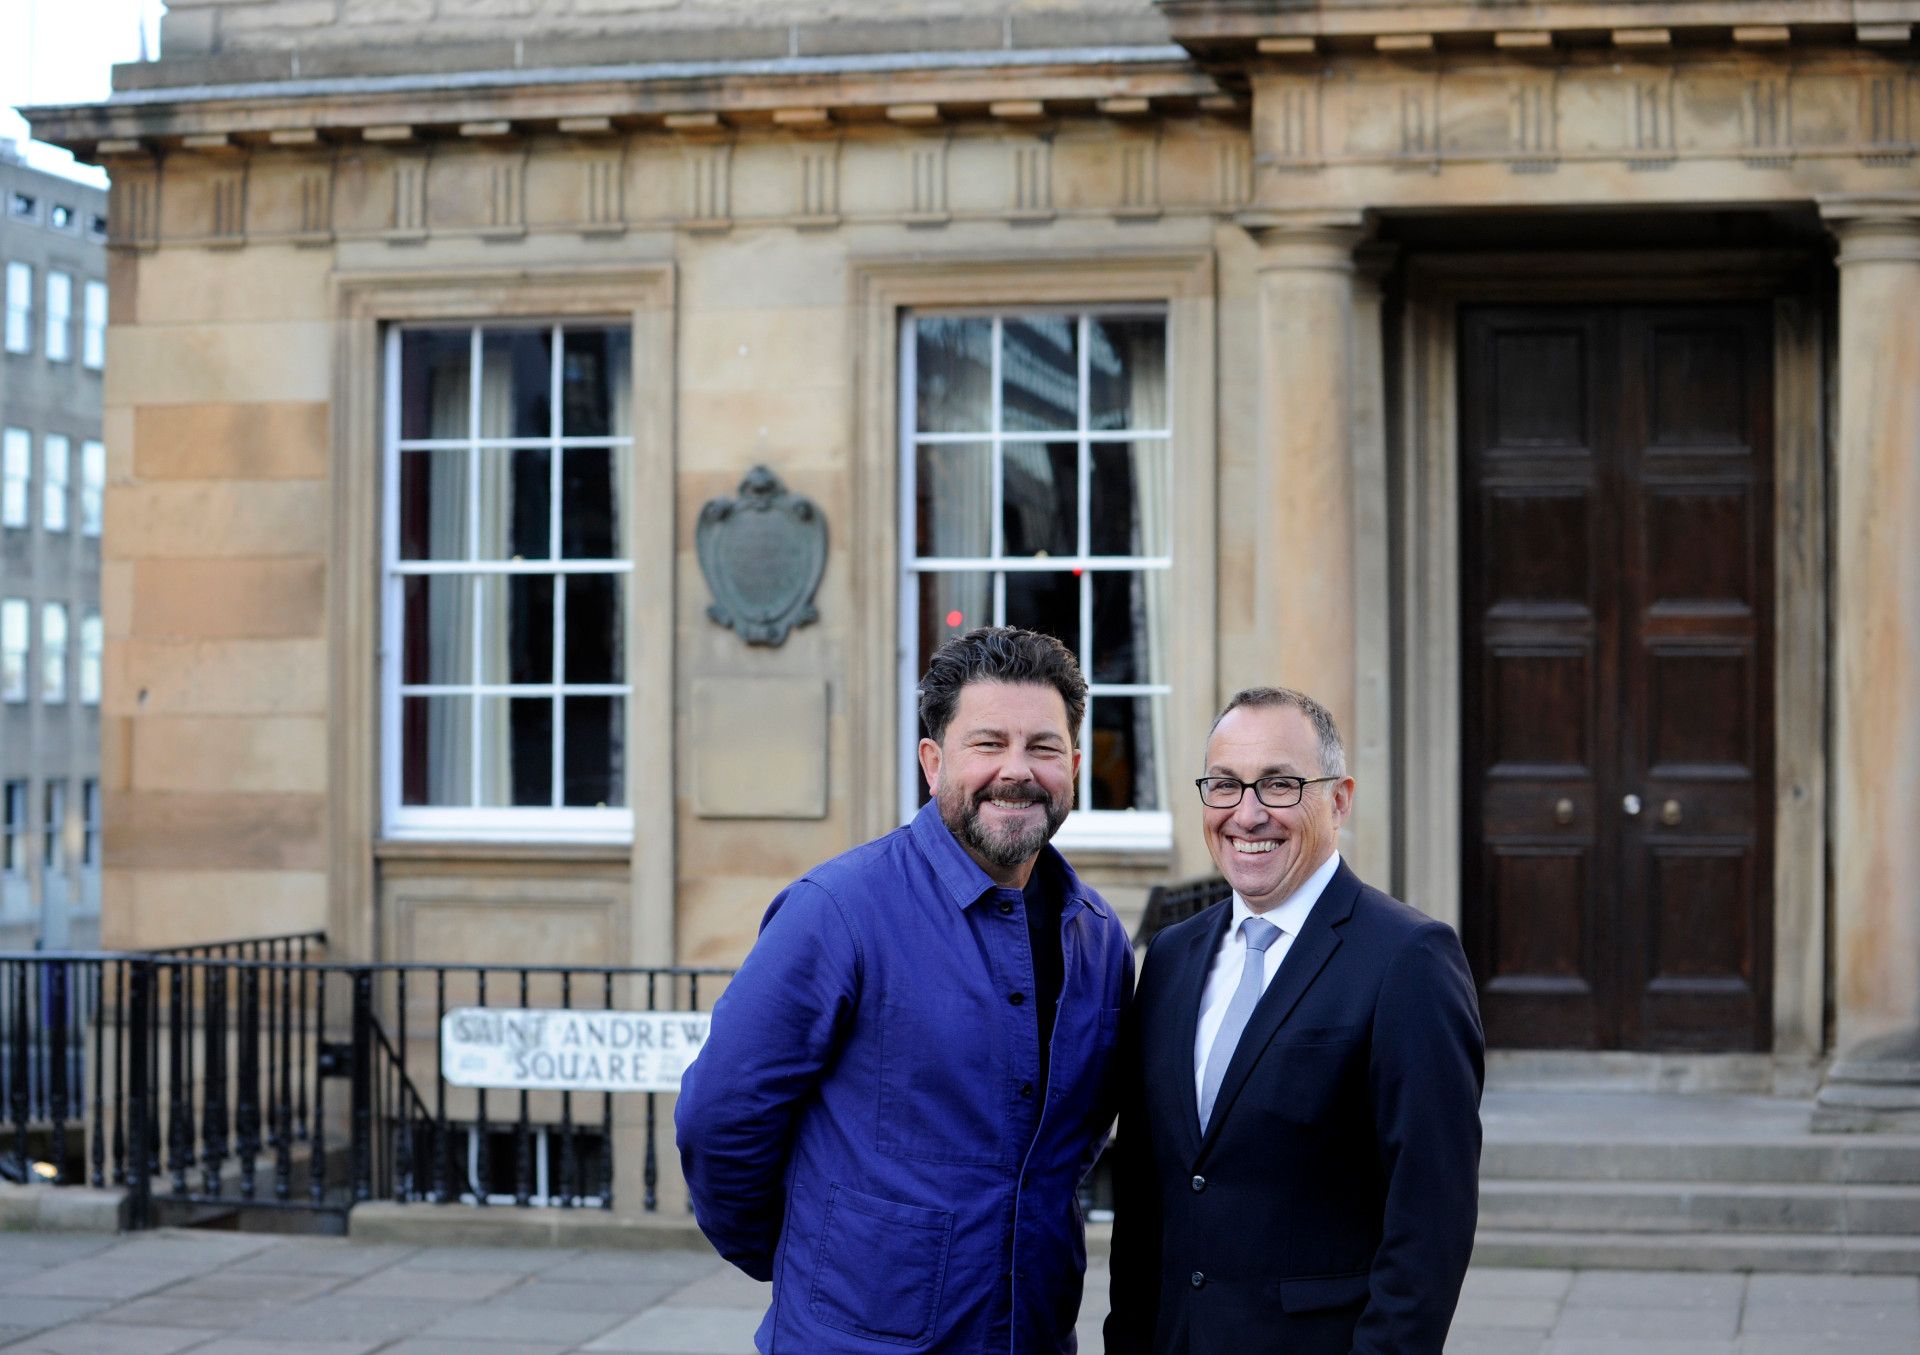 Work completes on boutique hotel in Edinburgh